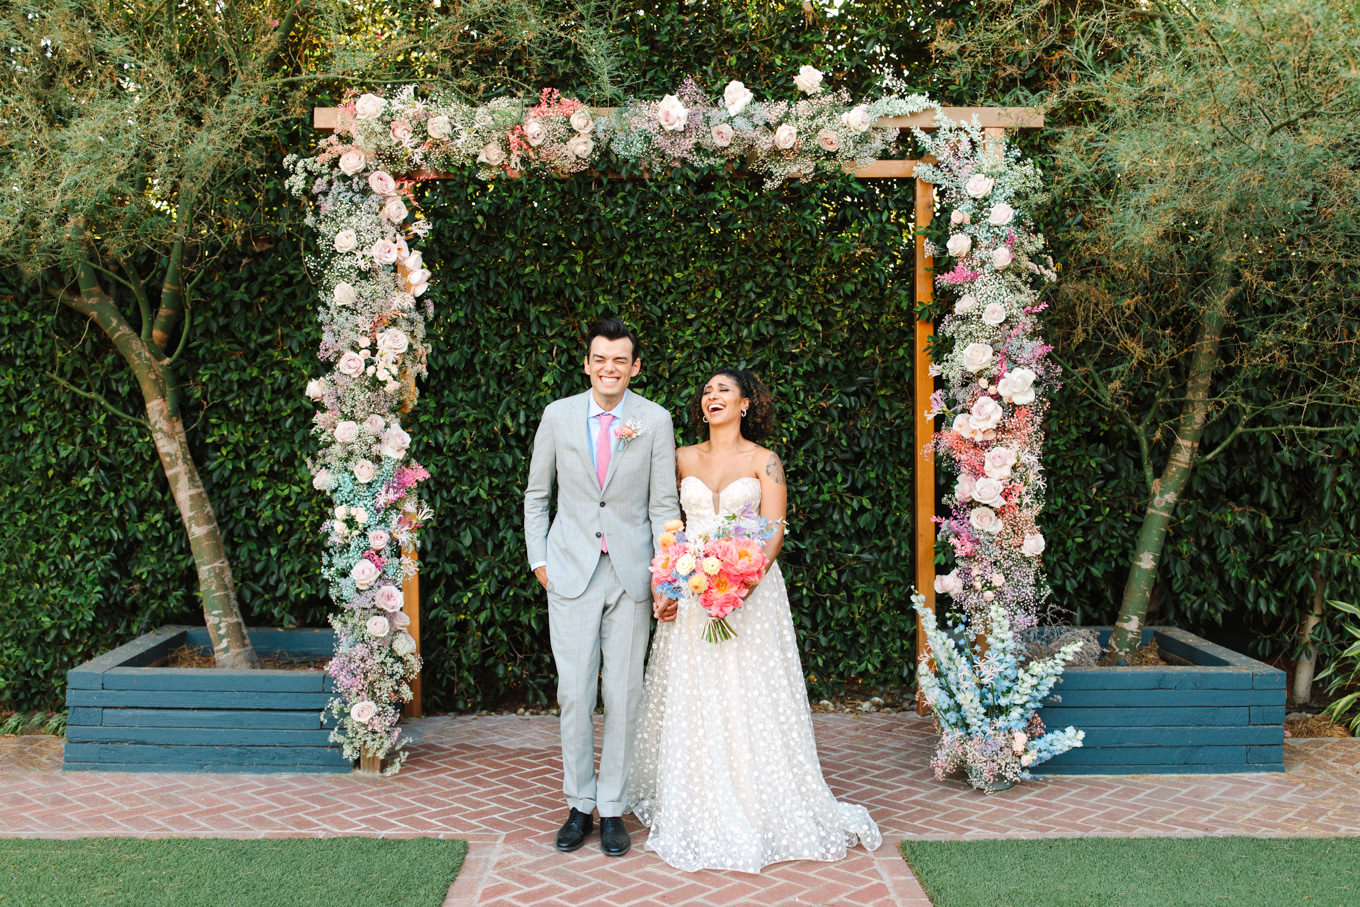 Joyful wedding portrait under ceremony arch | Colorful pop-up micro wedding at The Ruby Street Los Angeles featured on Green Wedding Shoes | Colorful and elevated photography for fun-loving couples in Southern California | #colorfulwedding #popupwedding #weddingphotography #microwedding Source: Mary Costa Photography | Los Angeles